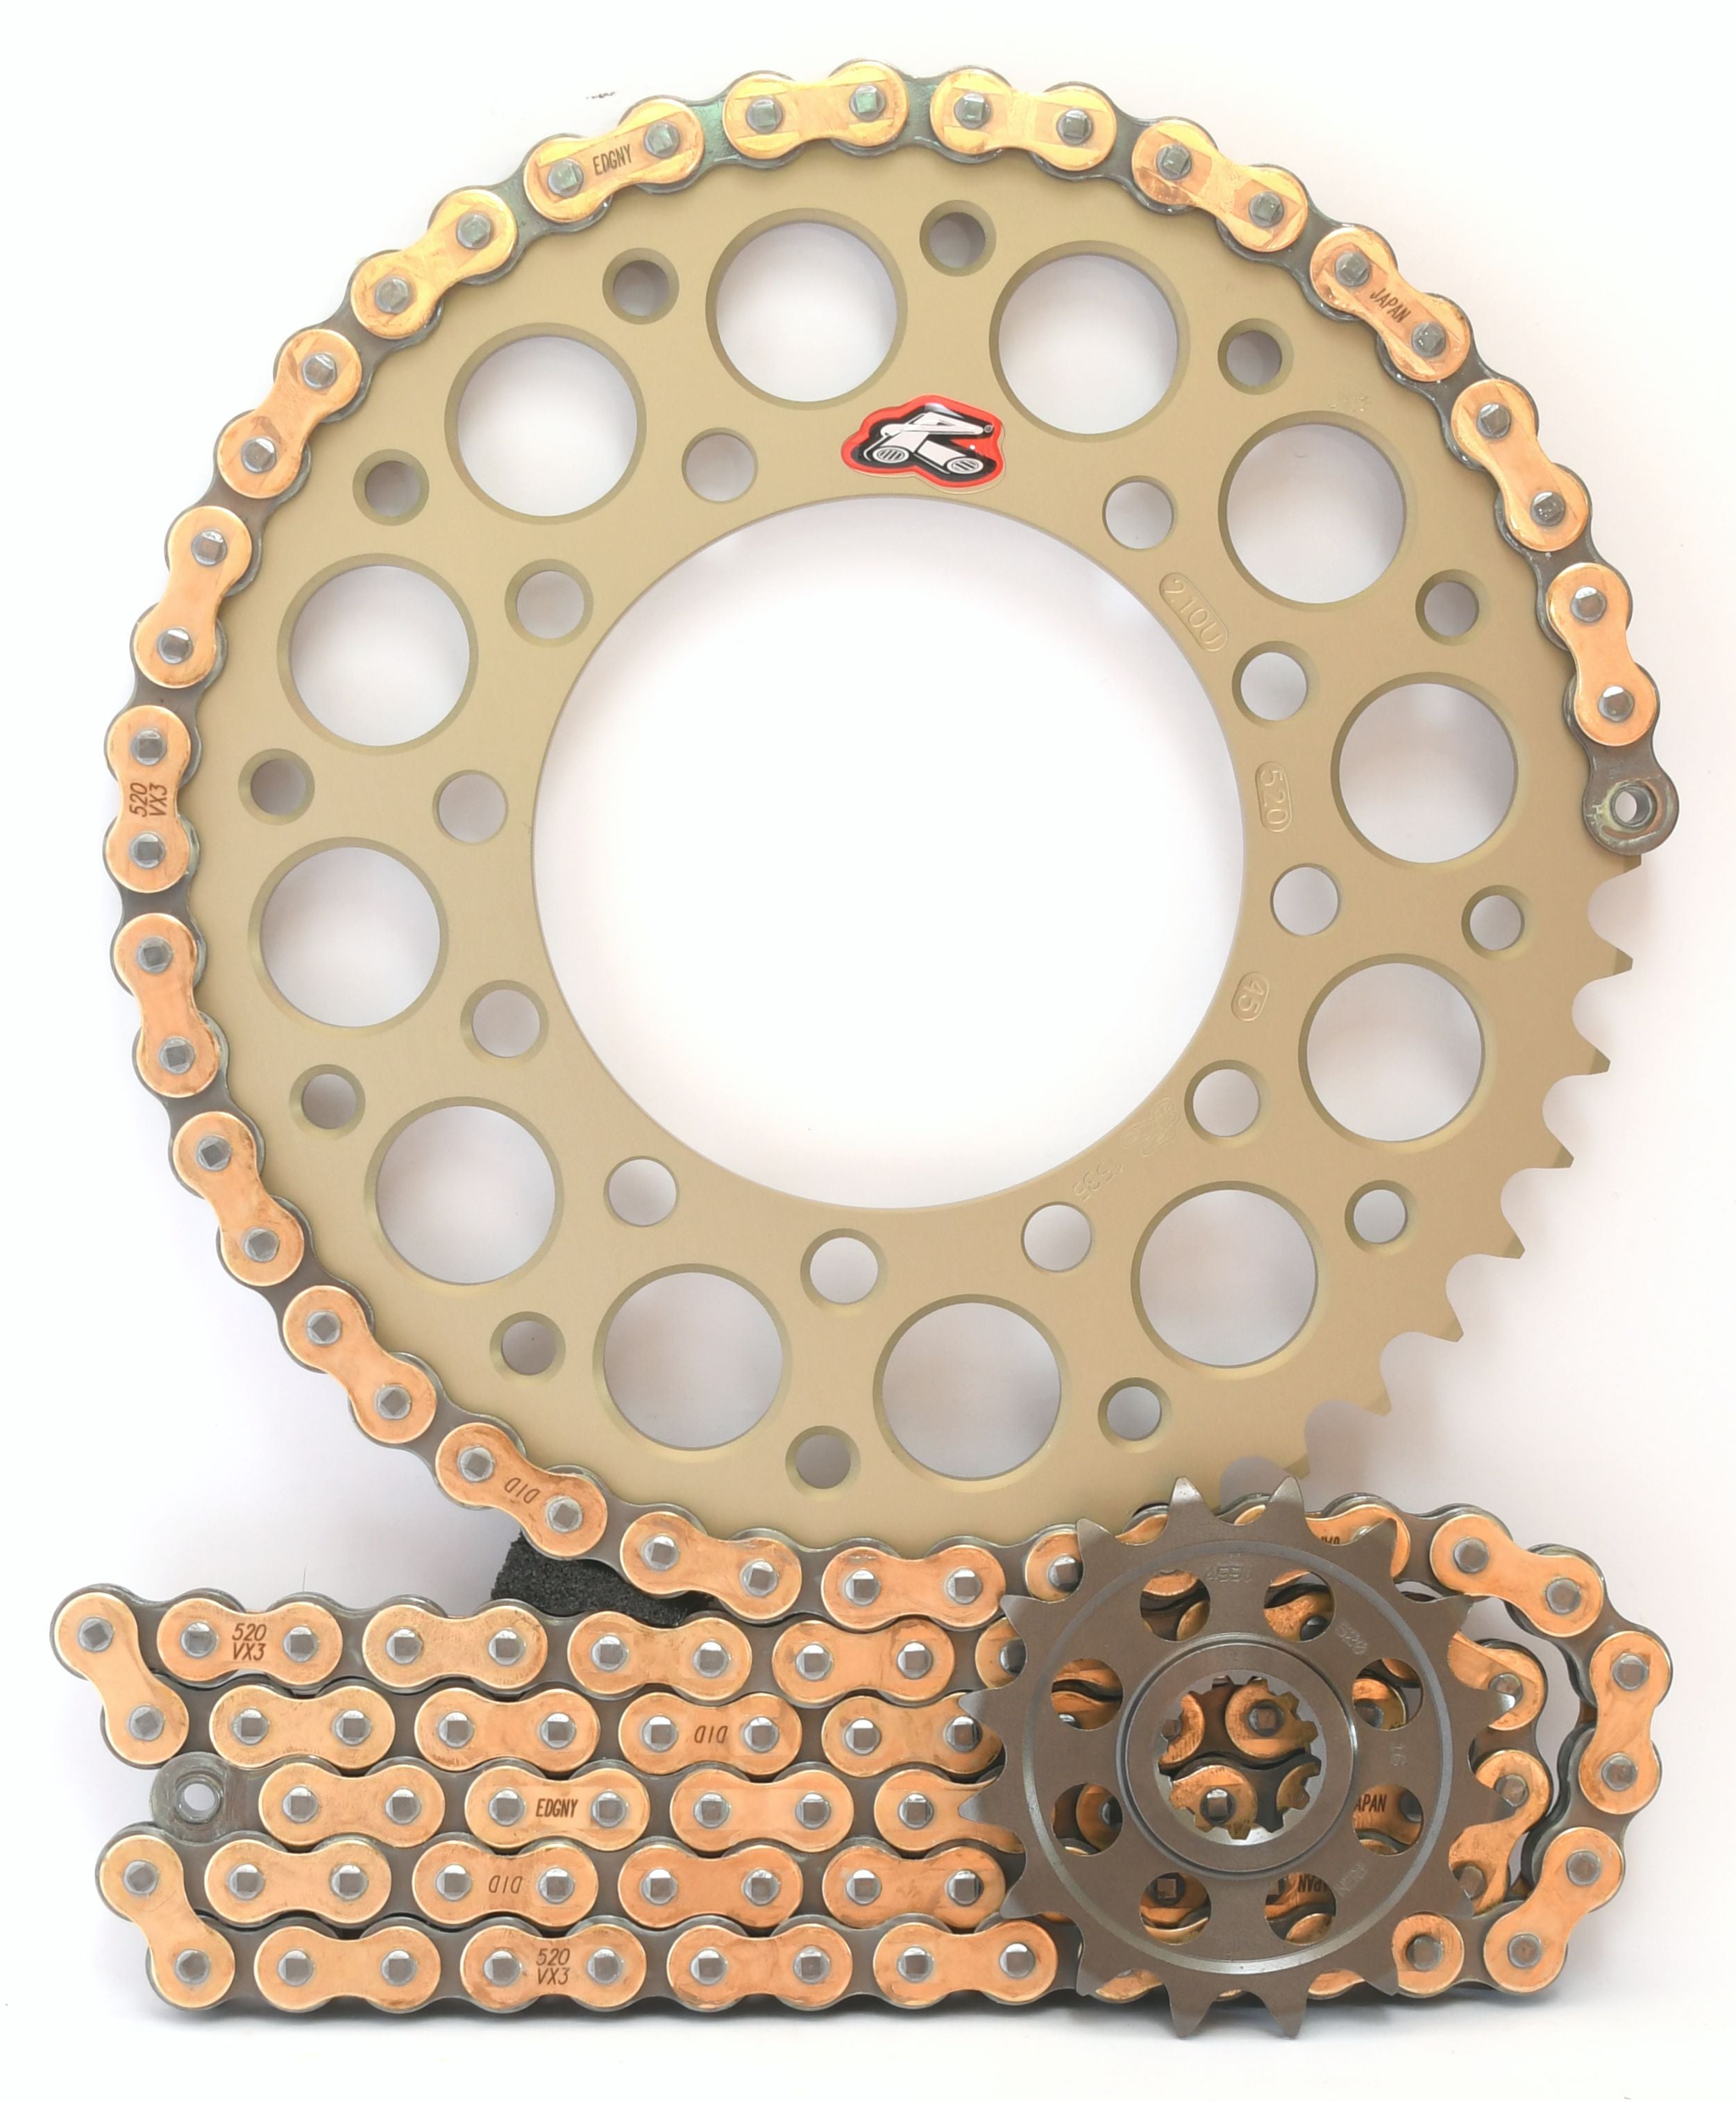 Renthal Ultralight DID Chain & Sprocket Kit for Kawasaki ZX6R 2007> - Choose Your Gearing